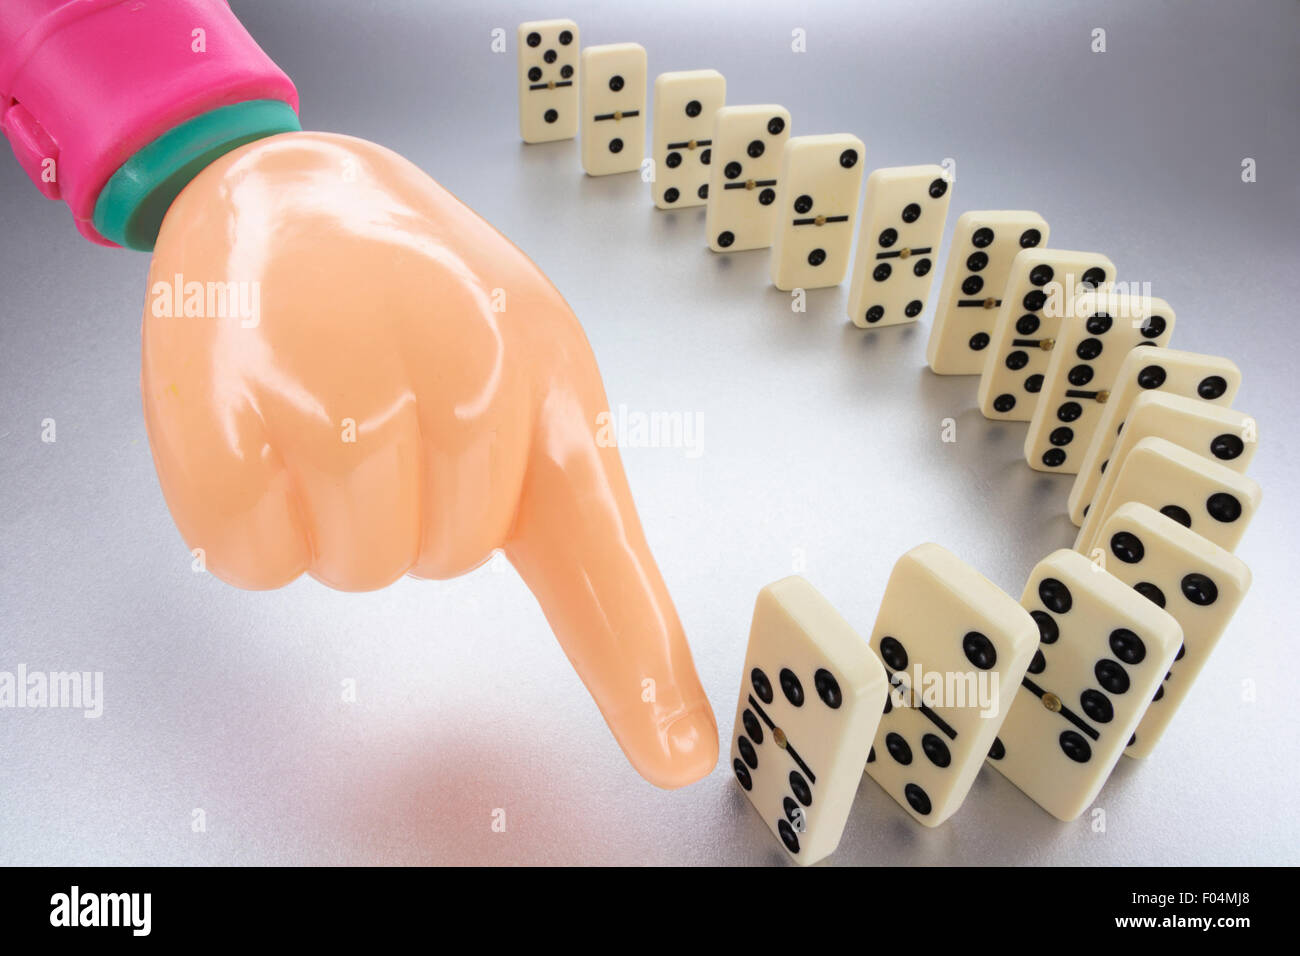 Plastic Hand and Row of Dominoes Stock Photo